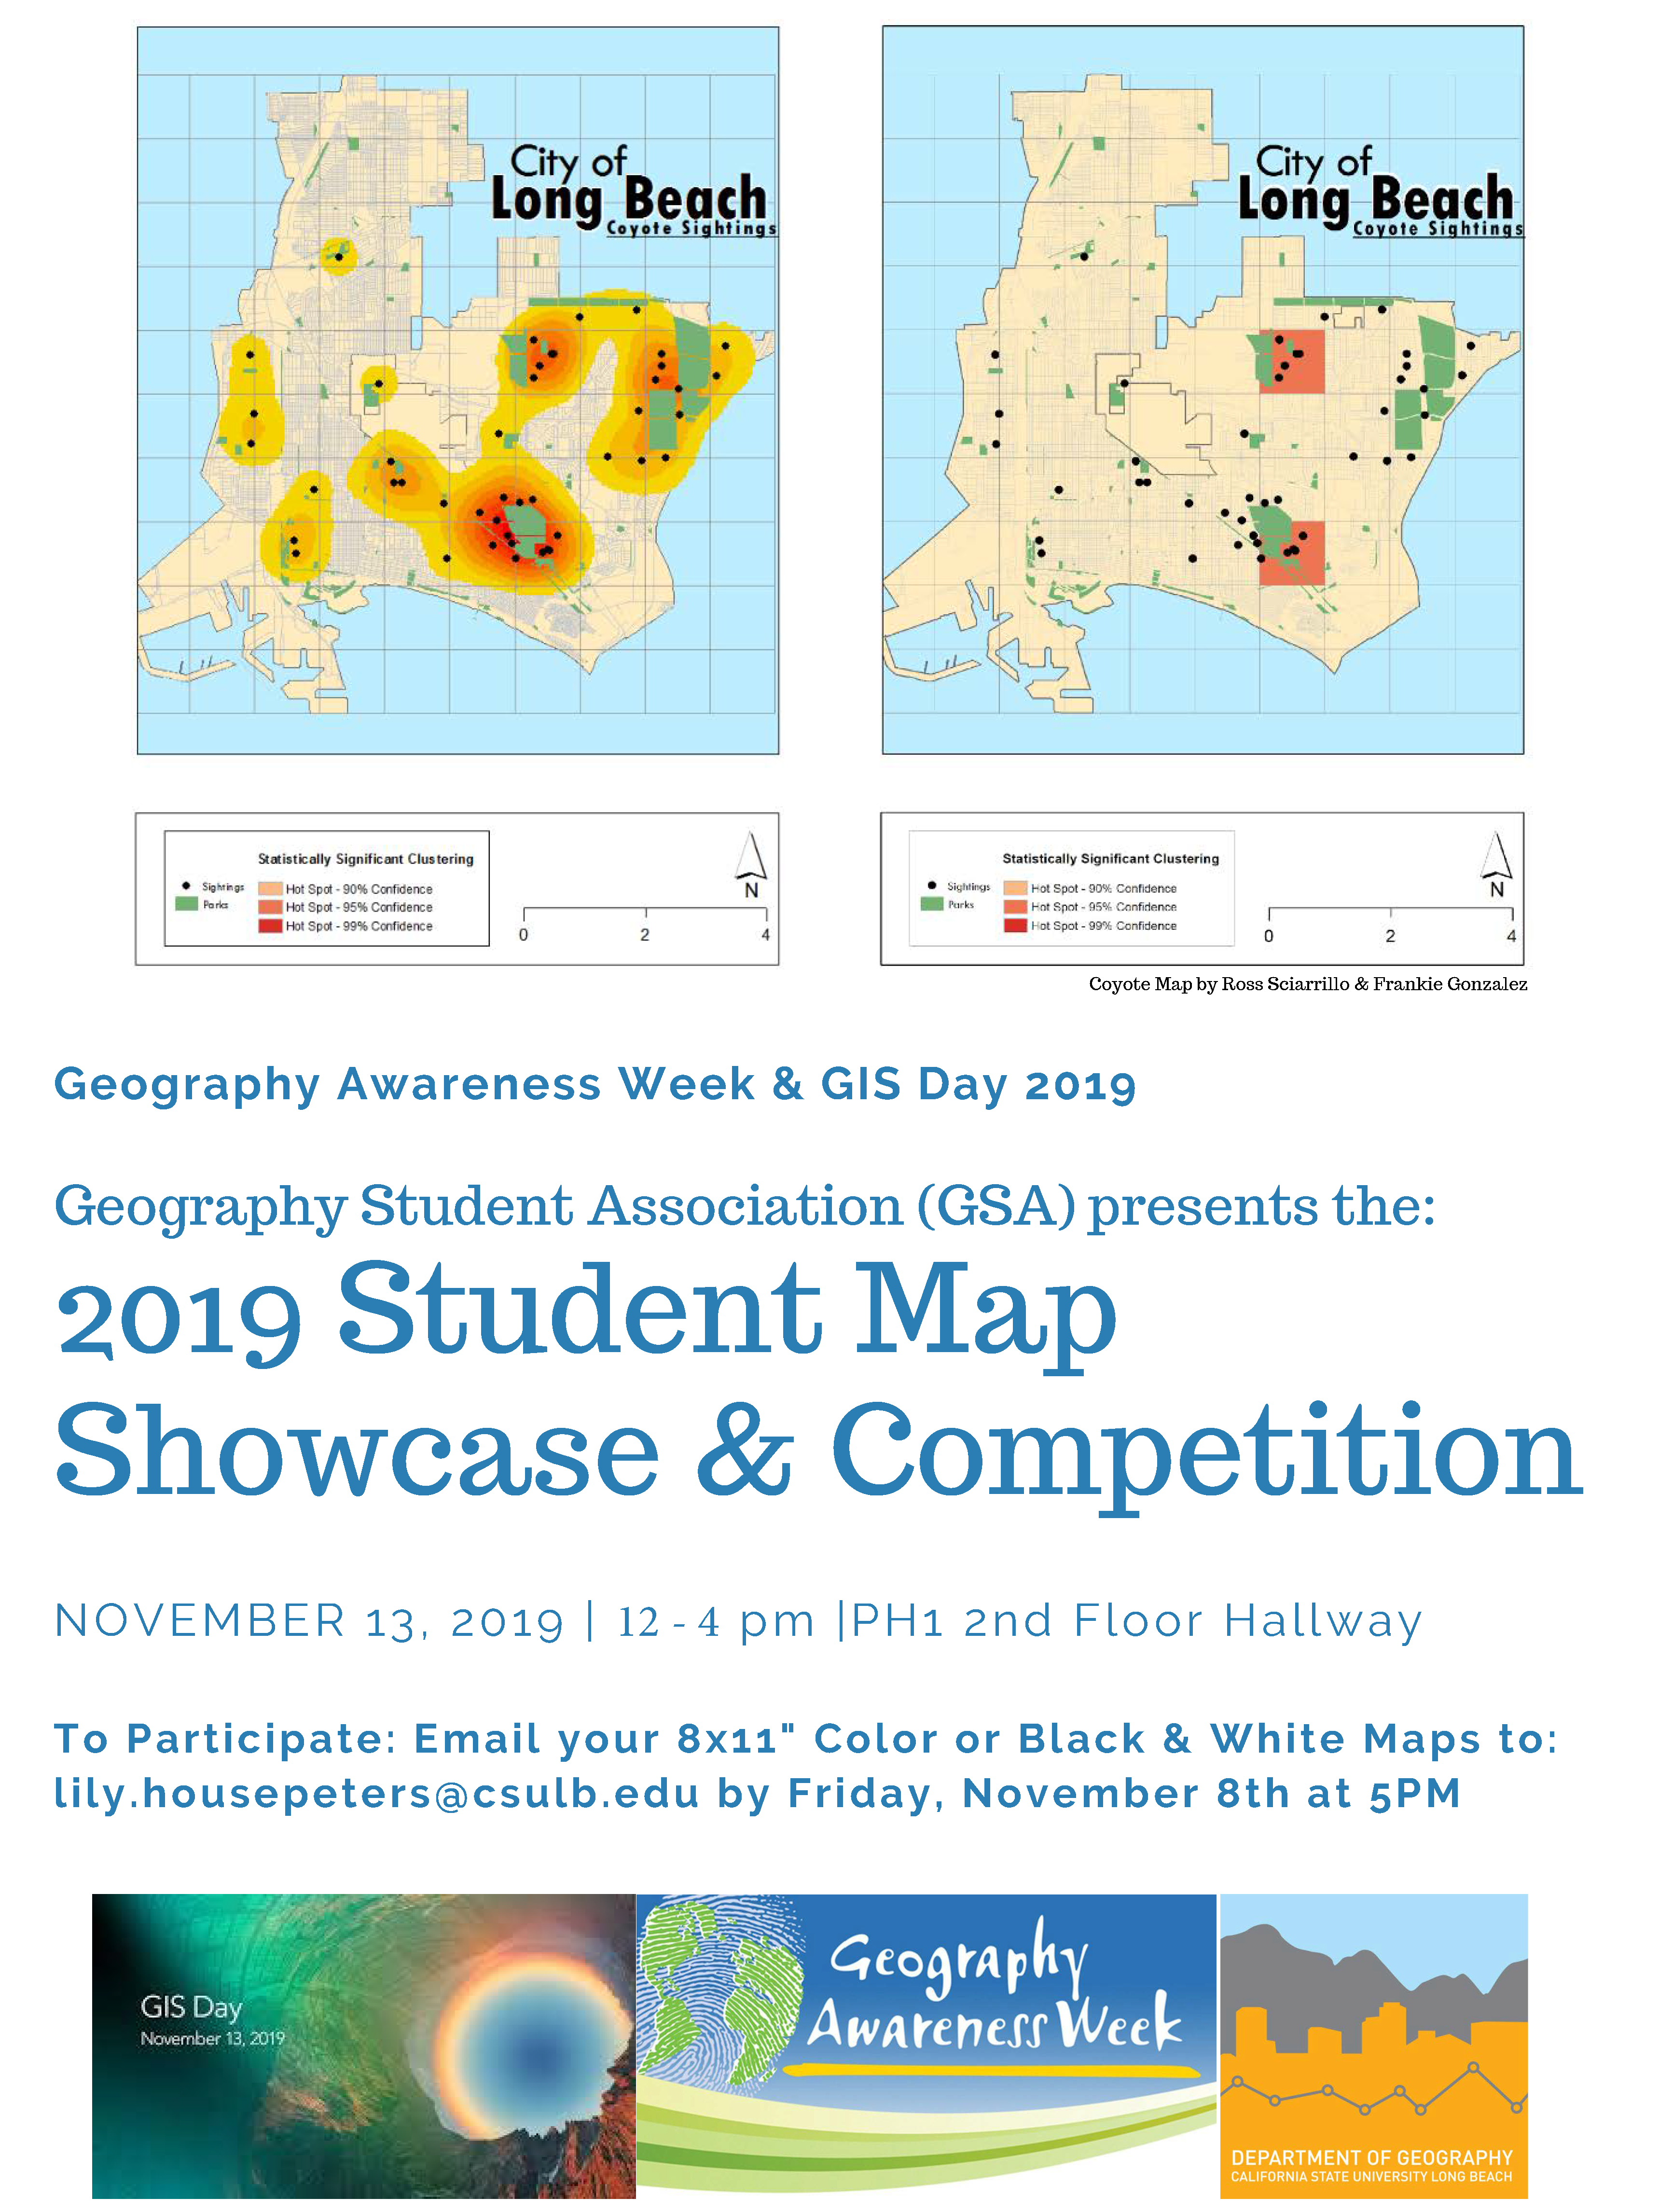 2019 Student Map Showcase and Competition Flyer